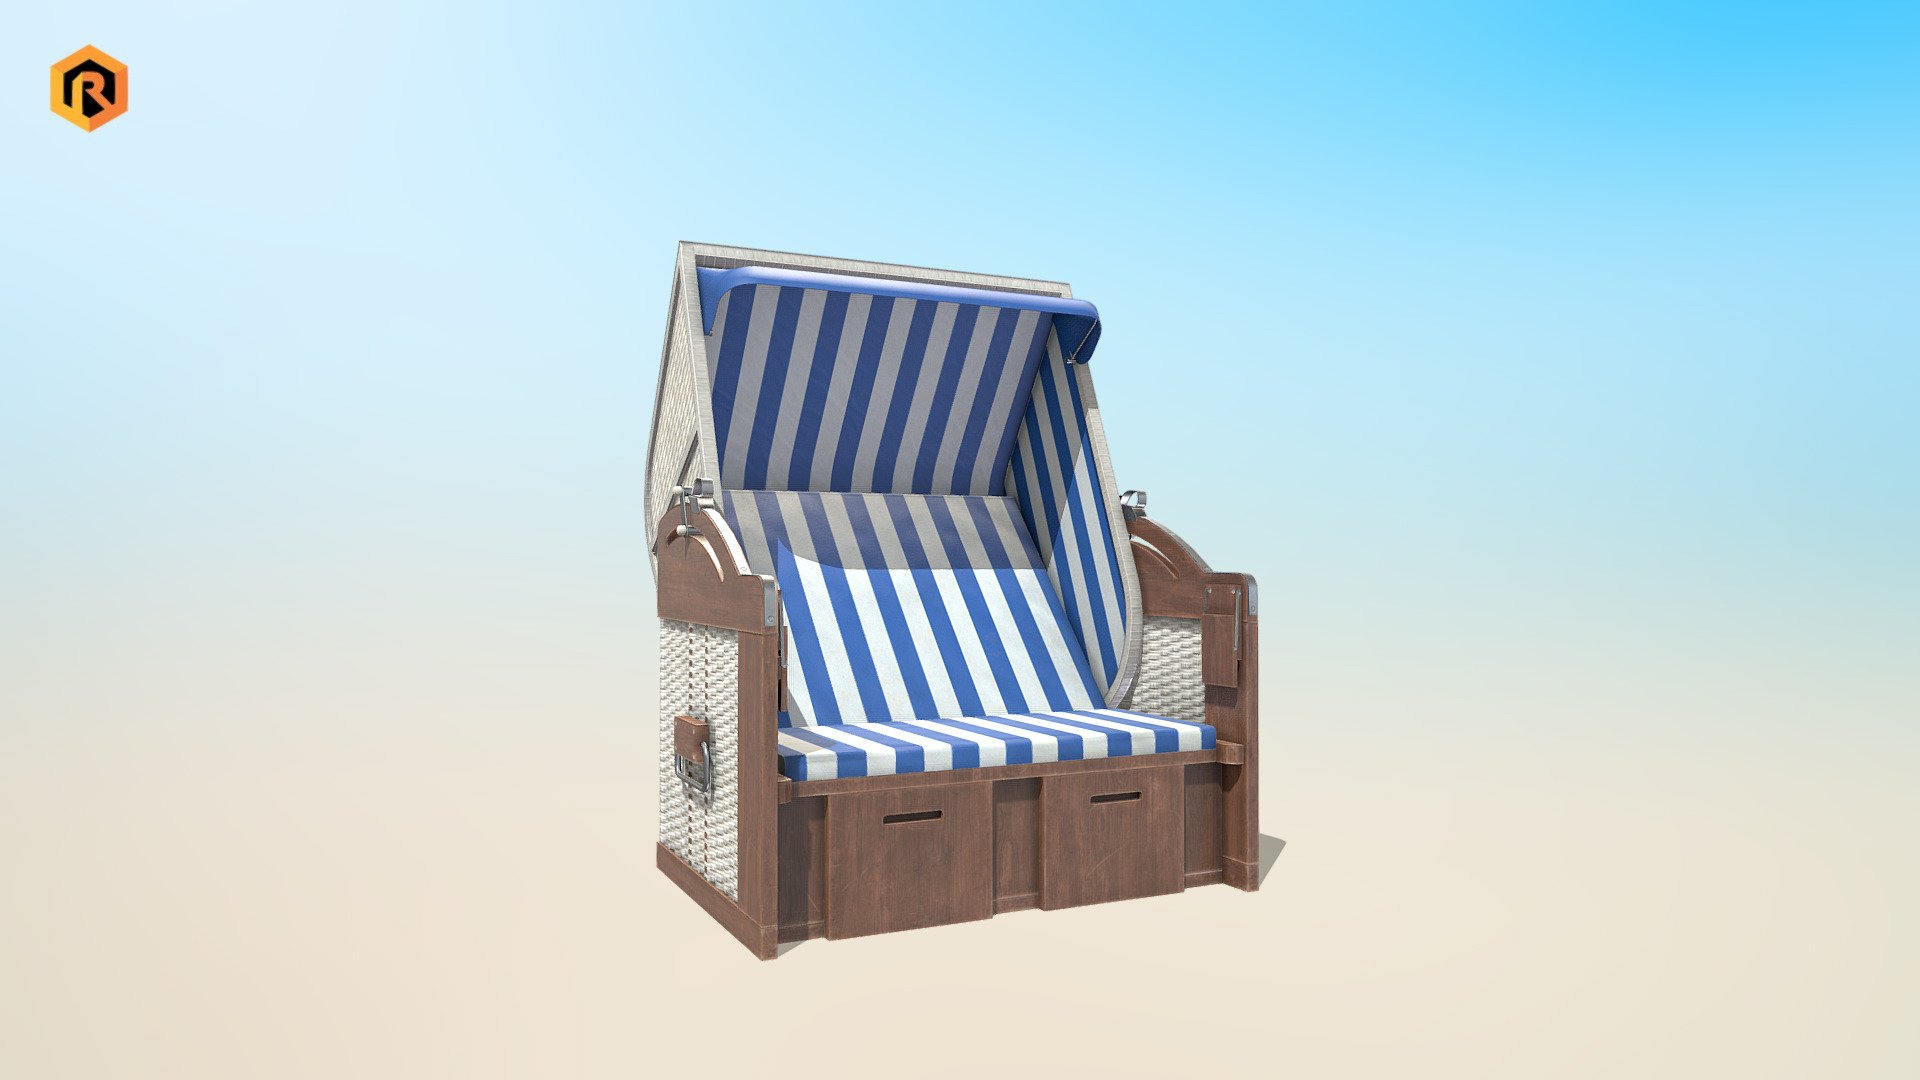 High quality low-poly 3D model of Roofed Wooden Beach Seat. It is best for use in games and other VR / AR, real-time applications 
such as Unity or Unreal Engine. It can also be rendered in Blender (ex Cycles) or Vray as the model is equipped with 
all required PBR textures.  Model is built with great attention to details and realistic proportions with correct geometry. 
PBR texture sets are very detailed so it makes this model good enough for close-up.

Models Info:




PBR BeachChair texture set 4096 (Albedo, Metallic, Smoothness, Normal, Ambient Occlusion).

1 PBR textures set.

4888 Triangles.

4986  Vertices.

Model is one mesh.

Model completely unwrapped.

Model is fully textured with all materials applied.

Pivot points are correctly placed to suit animation process.

Model scaled to approximate real world size (centimeters).

All nodes, materials and textures are appropriately named.
 - Roofed Wooden Beach Seat - Buy Royalty Free 3D model by Rescue3D Assets (@rescue3d) 3d model